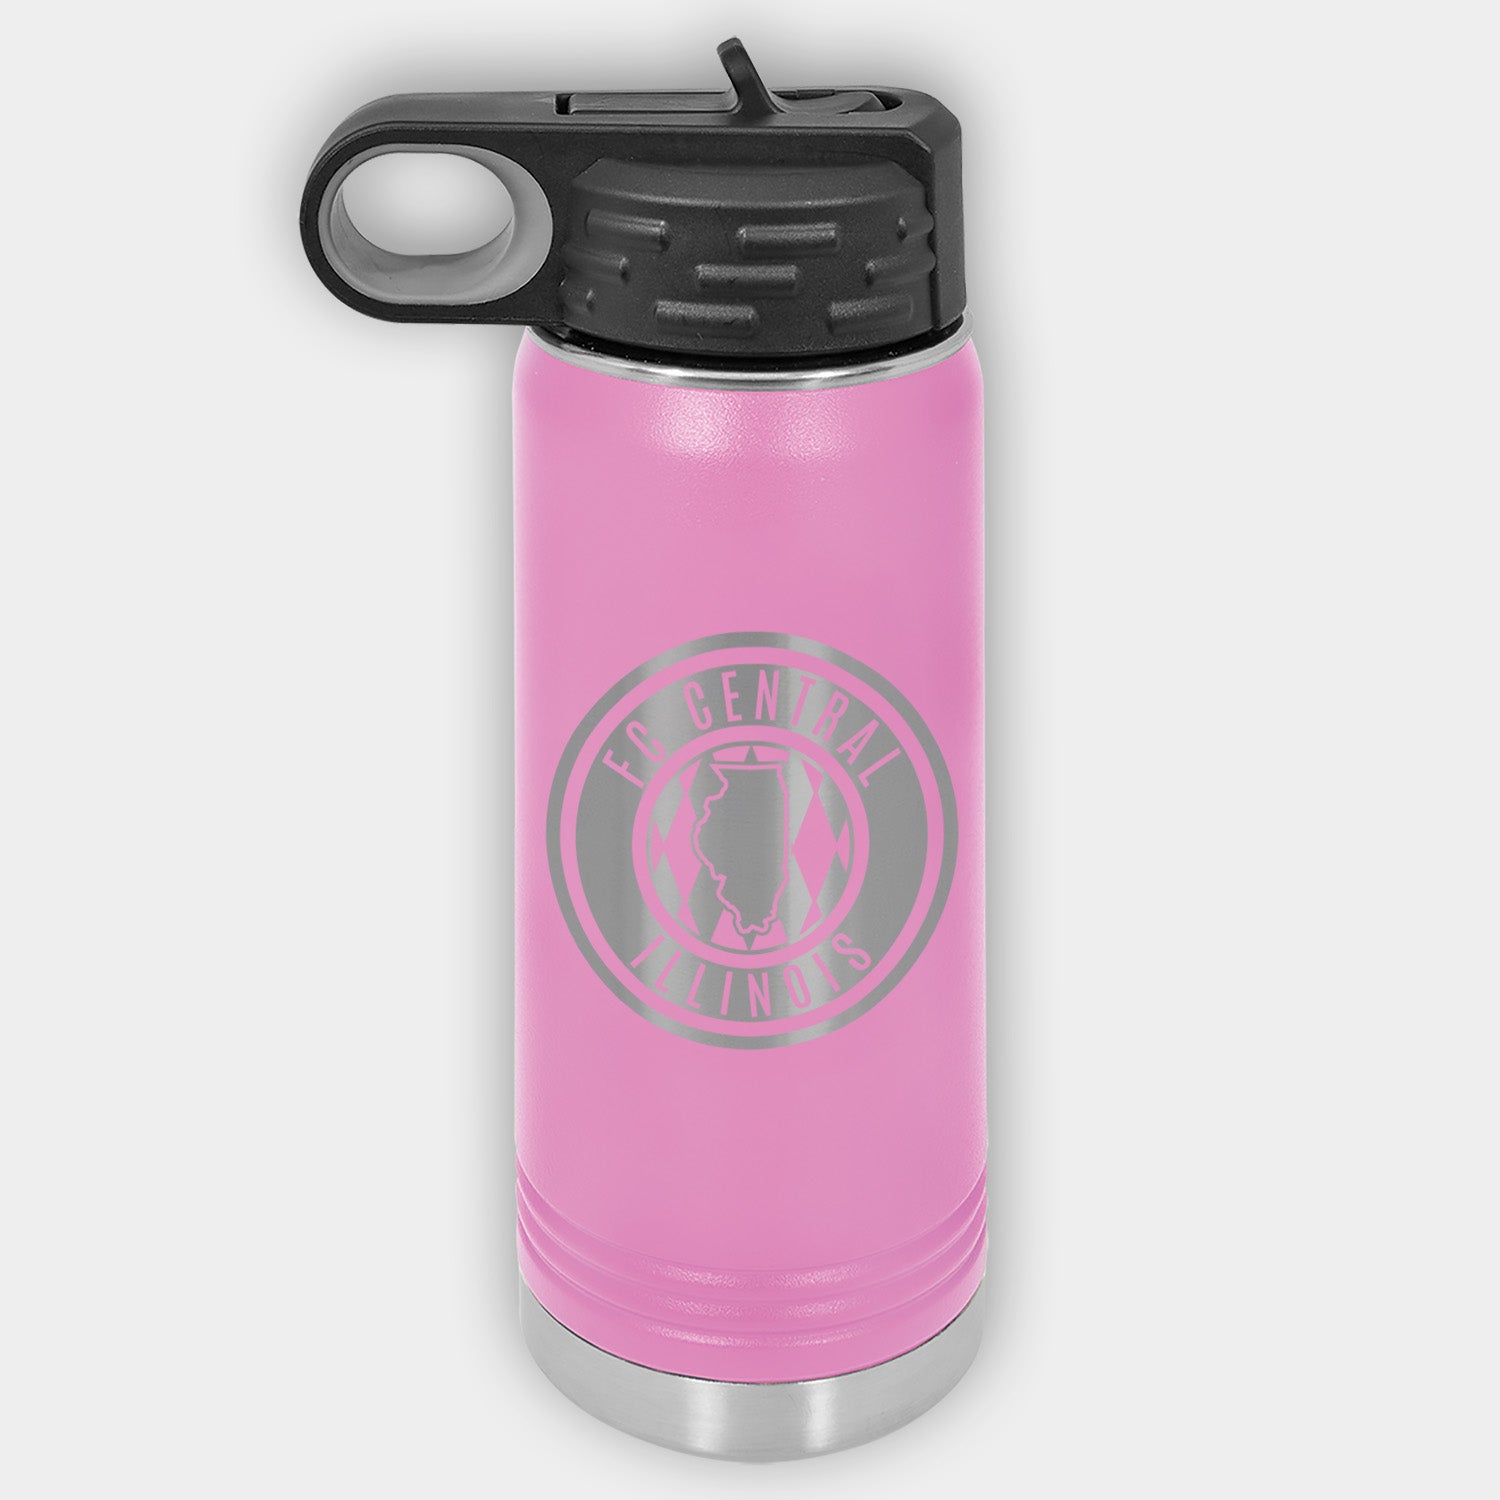 FC Central Illinois Engraved Stainless Water Bottle